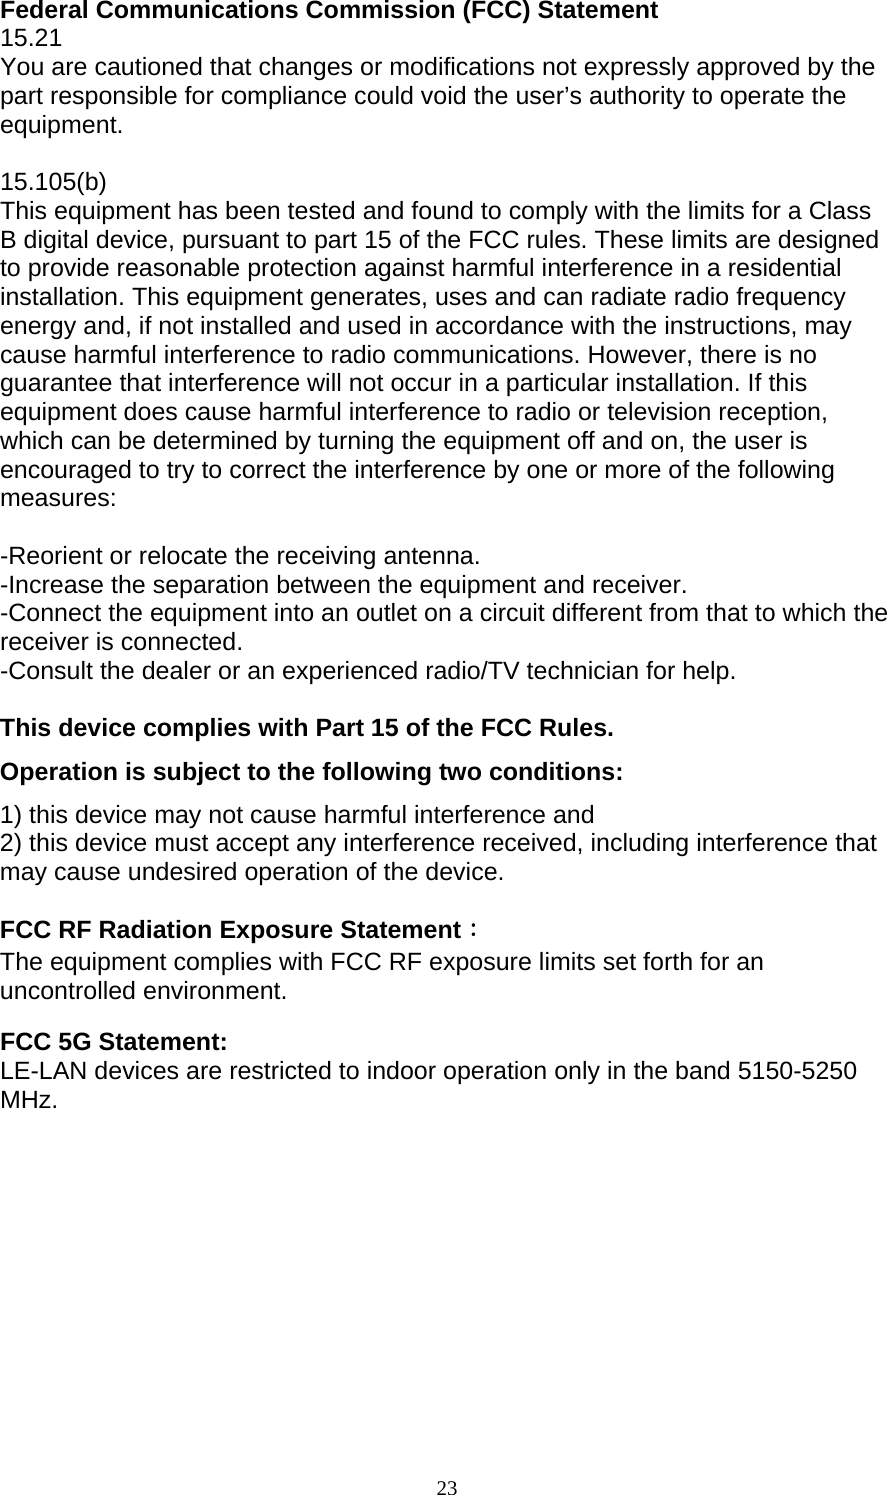 23  Federal Communications Commission (FCC) Statement 15.21 You are cautioned that changes or modifications not expressly approved by the part responsible for compliance could void the user’s authority to operate the equipment.  15.105(b) This equipment has been tested and found to comply with the limits for a Class B digital device, pursuant to part 15 of the FCC rules. These limits are designed to provide reasonable protection against harmful interference in a residential installation. This equipment generates, uses and can radiate radio frequency energy and, if not installed and used in accordance with the instructions, may cause harmful interference to radio communications. However, there is no guarantee that interference will not occur in a particular installation. If this equipment does cause harmful interference to radio or television reception, which can be determined by turning the equipment off and on, the user is encouraged to try to correct the interference by one or more of the following measures:  -Reorient or relocate the receiving antenna. -Increase the separation between the equipment and receiver. -Connect the equipment into an outlet on a circuit different from that to which the receiver is connected. -Consult the dealer or an experienced radio/TV technician for help.  This device complies with Part 15 of the FCC Rules.   Operation is subject to the following two conditions: 1) this device may not cause harmful interference and 2) this device must accept any interference received, including interference that may cause undesired operation of the device.  FCC RF Radiation Exposure Statement： The equipment complies with FCC RF exposure limits set forth for an uncontrolled environment.  FCC 5G Statement: LE-LAN devices are restricted to indoor operation only in the band 5150-5250 MHz.   